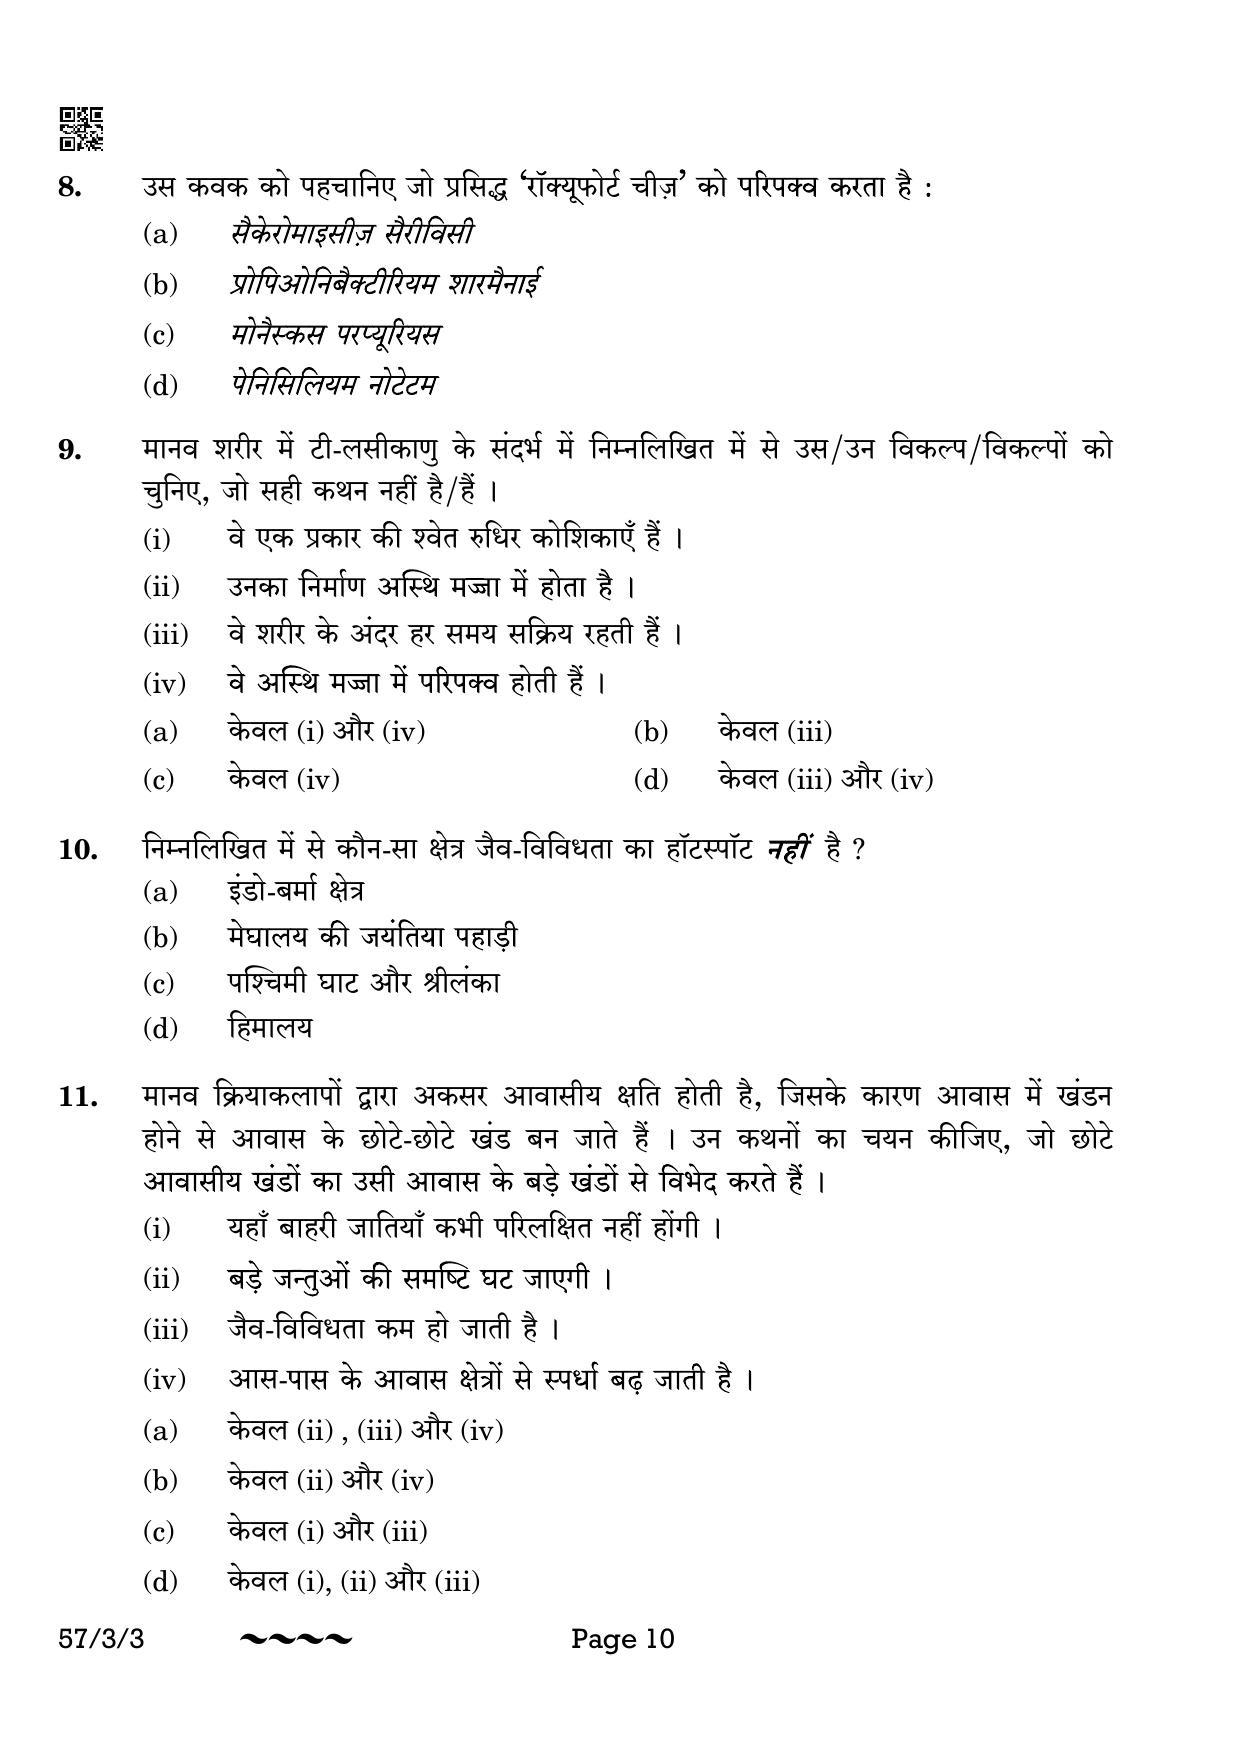 CBSE Class 12 57-3-3 Biology 2023 Question Paper - Page 10